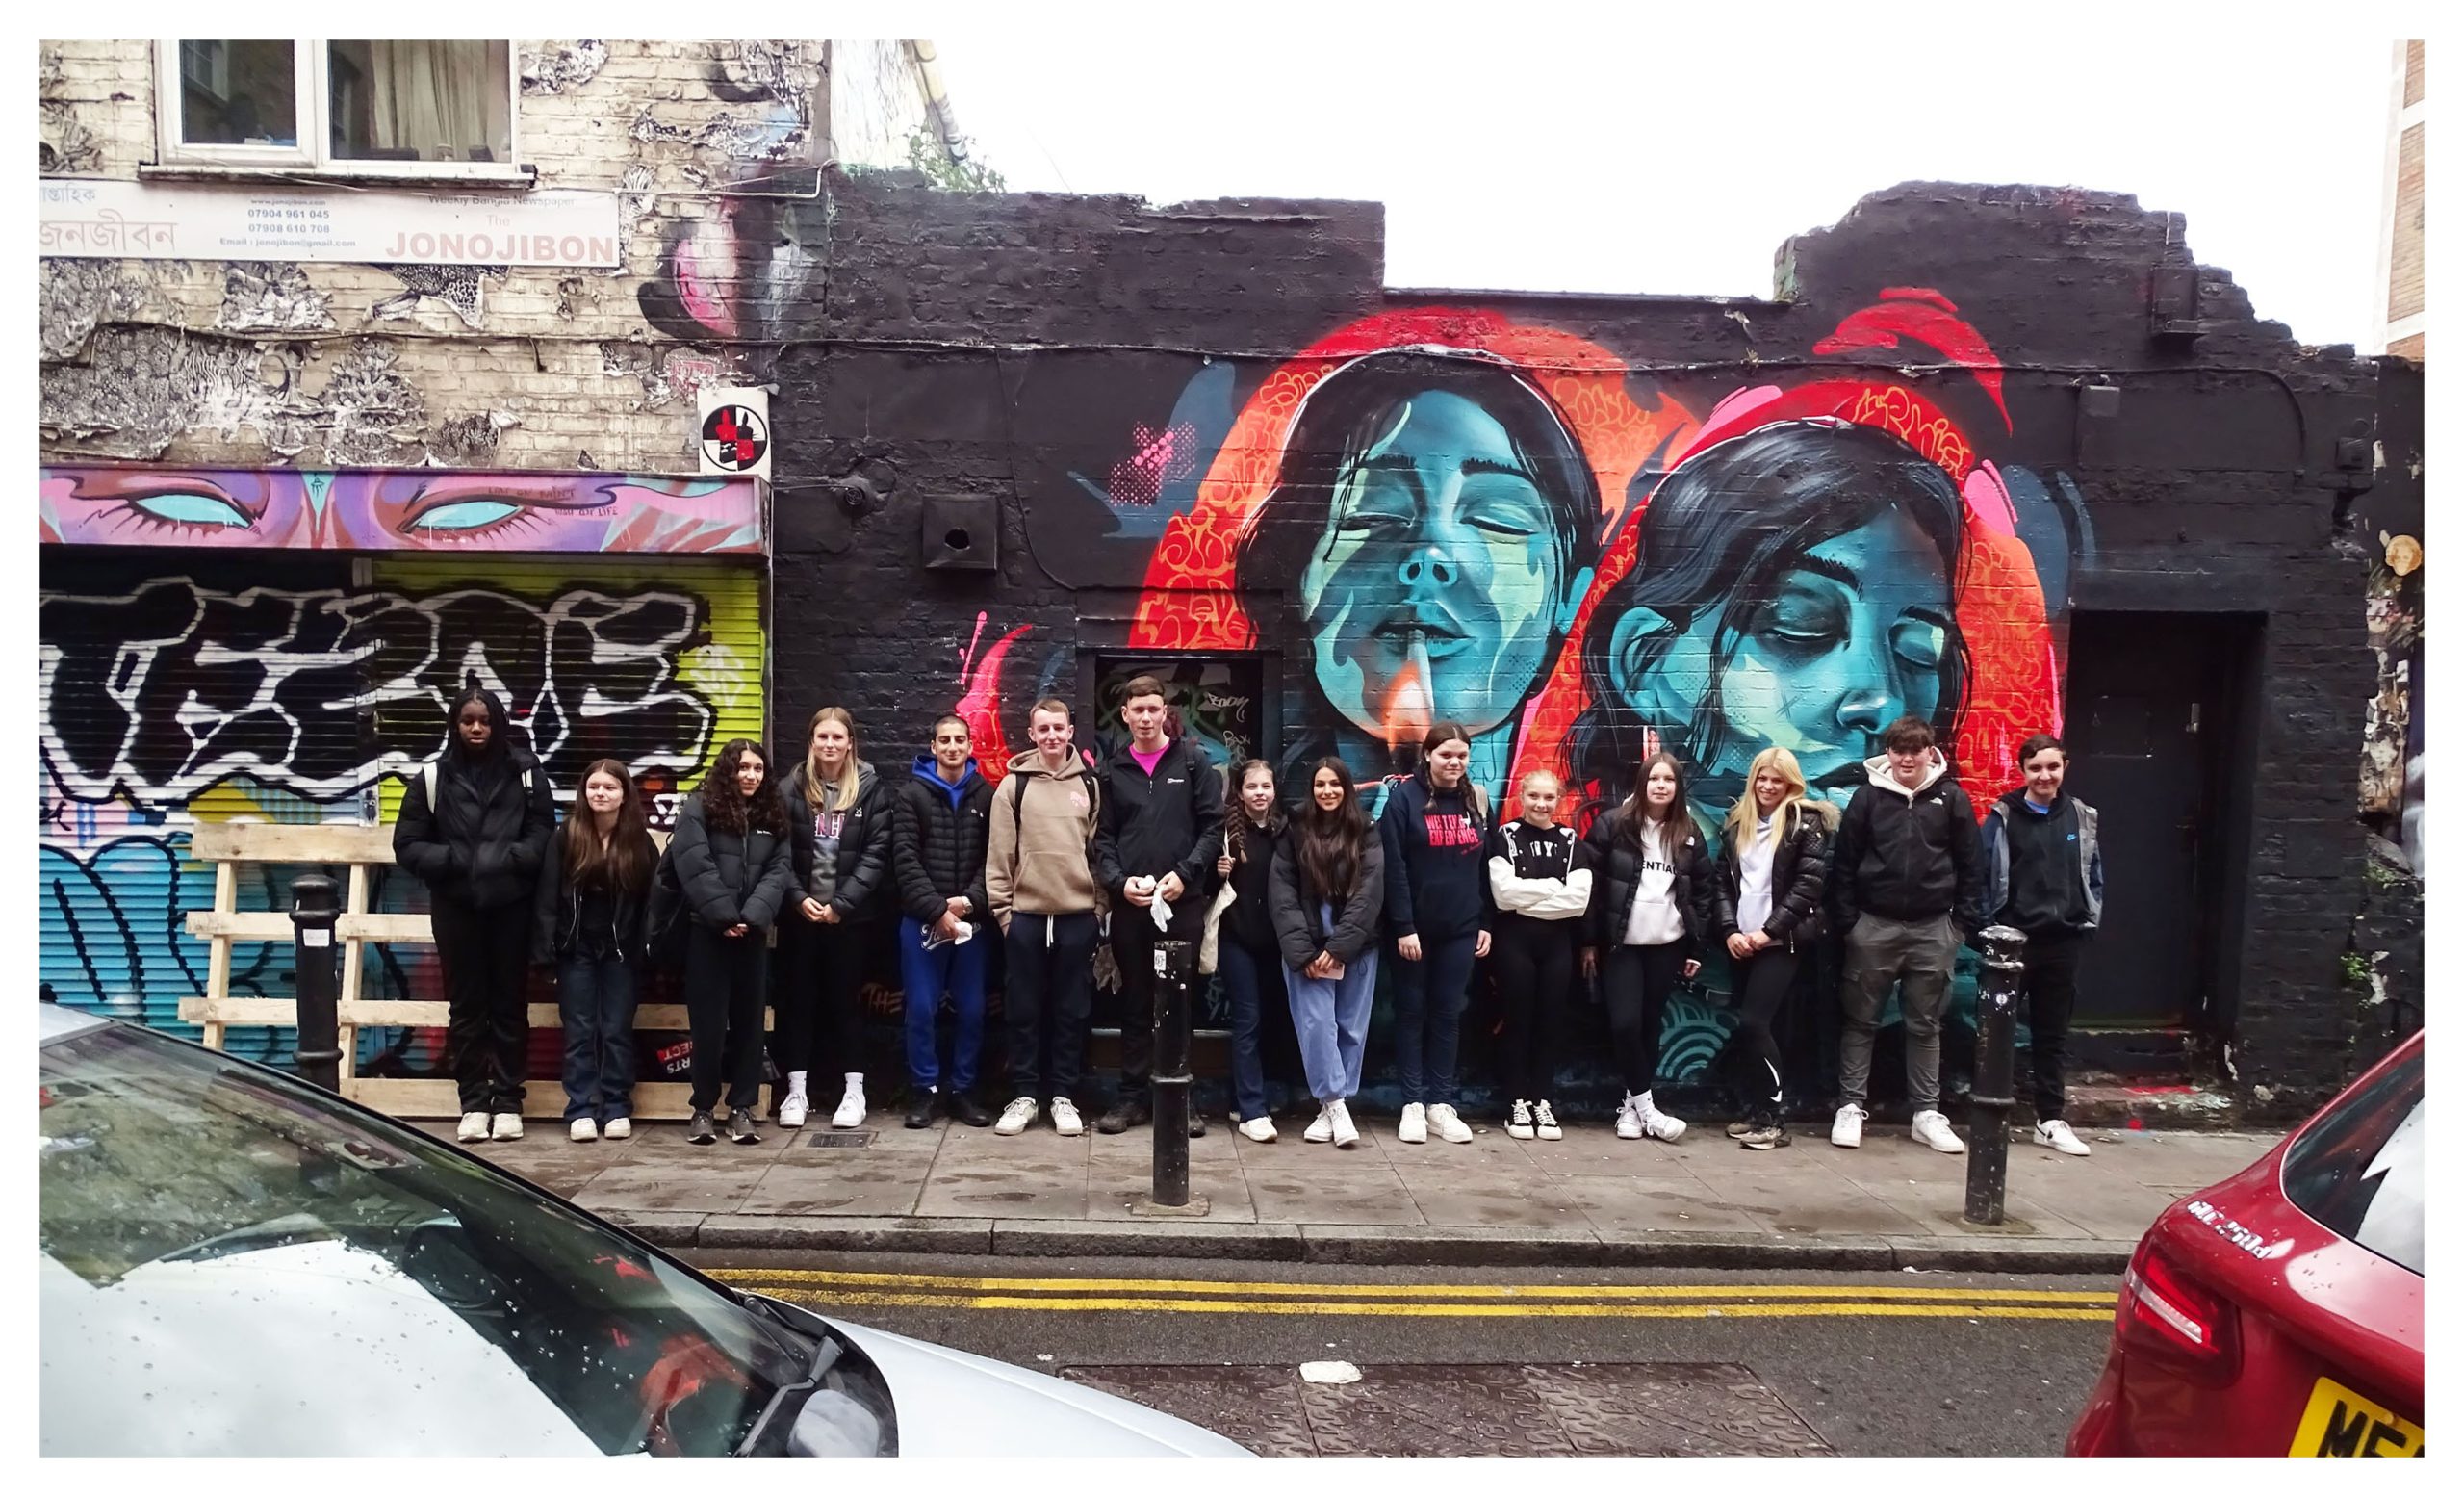 Food and Nutrition students pose for a photo in front of street art in London